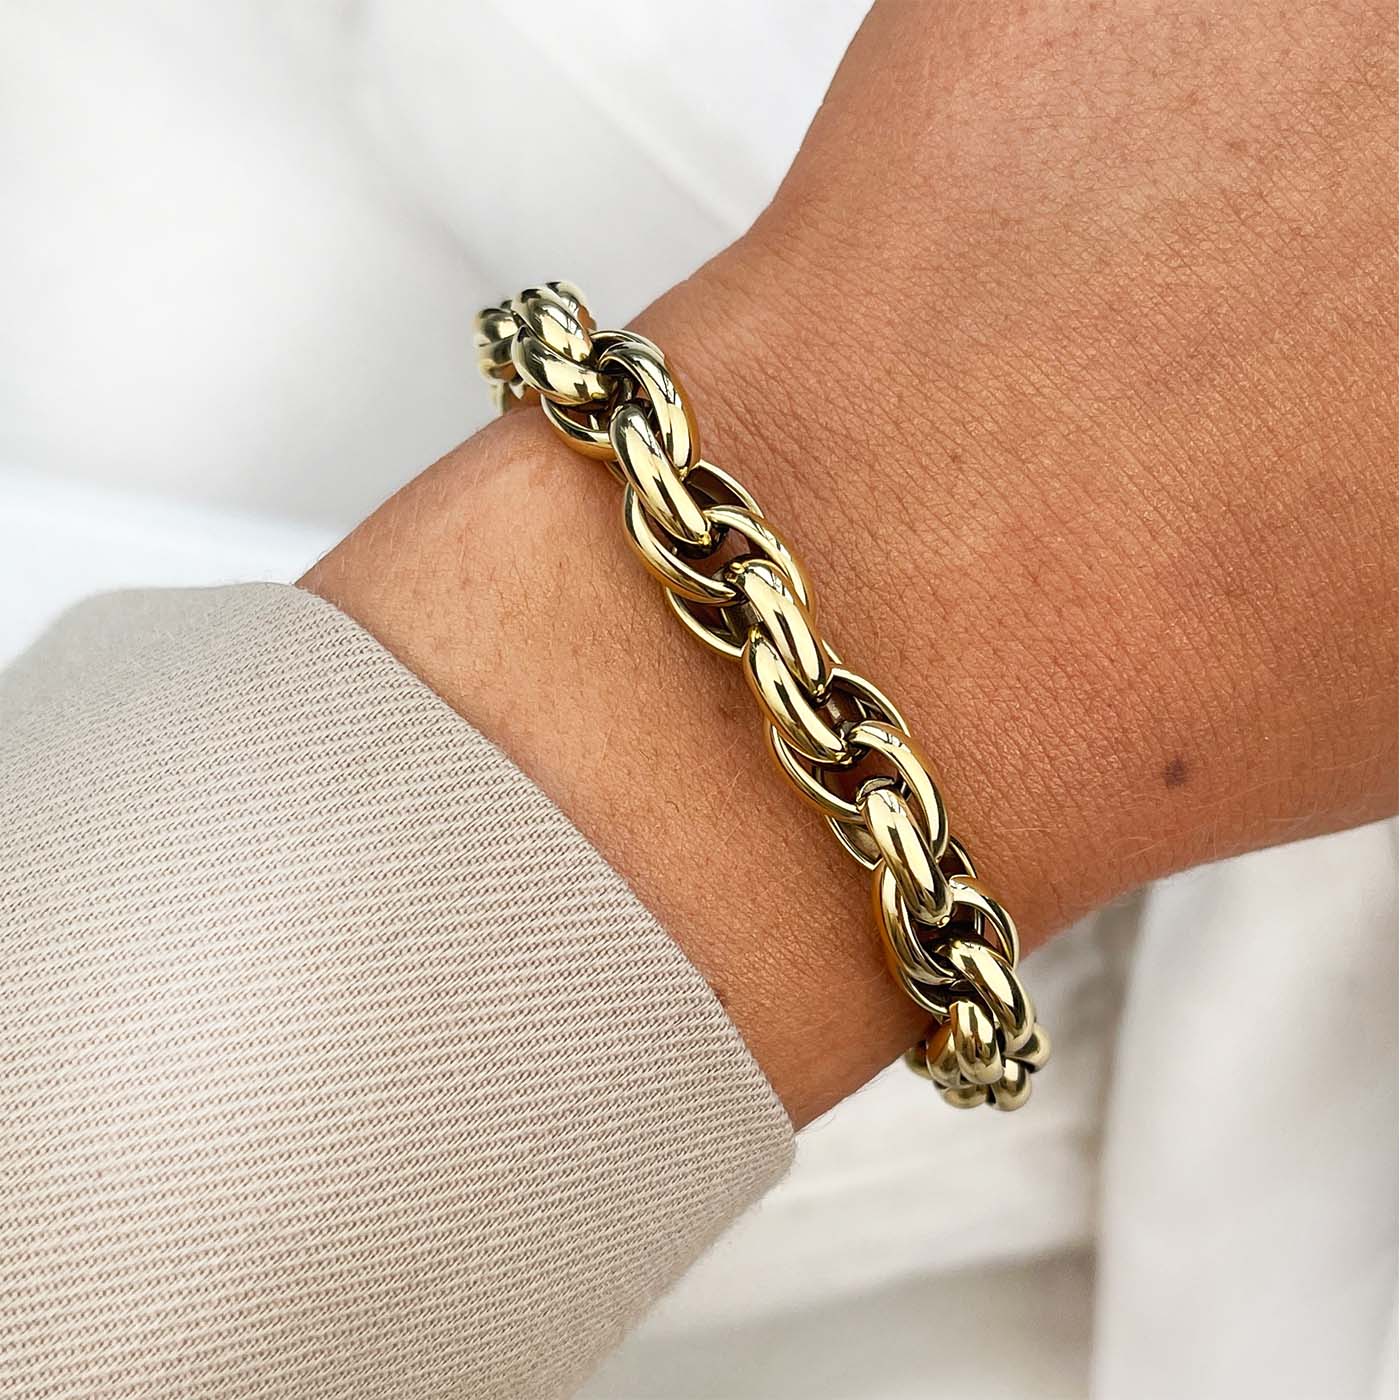 Gold Finish Twisted Rope Chain Bracelet, Anti-allergic Jewelry